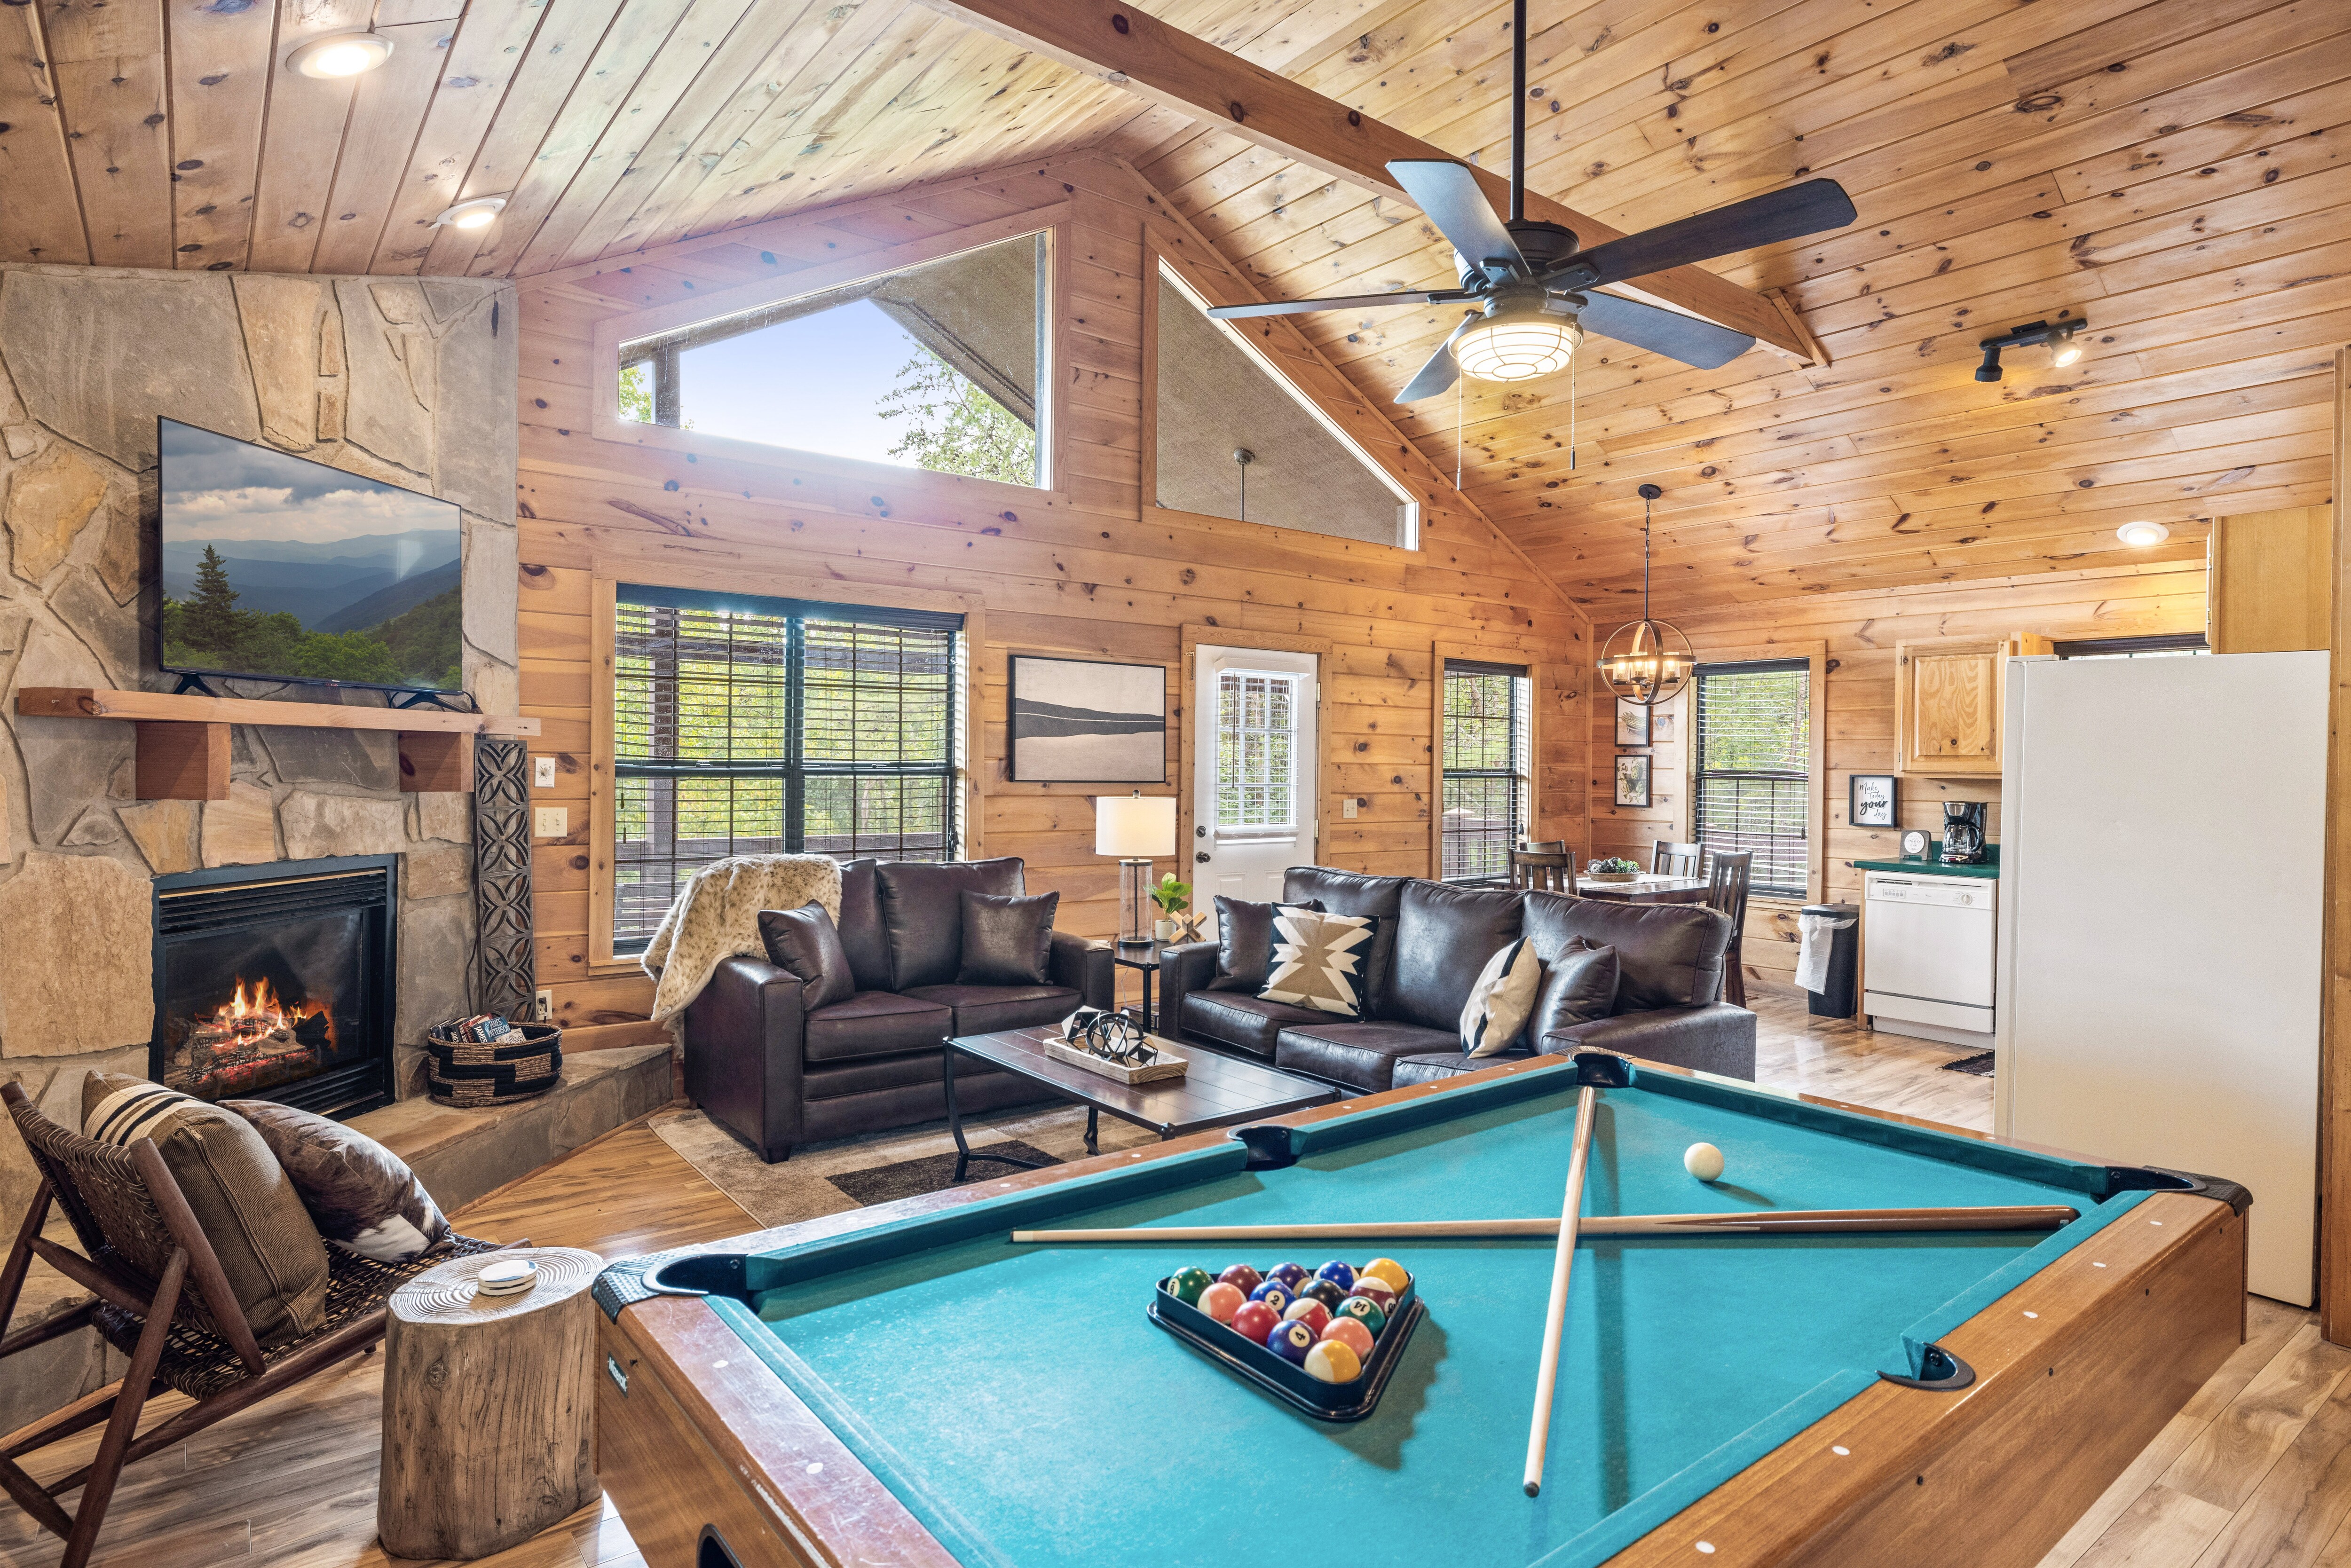 Property Image 1 - Pigeon Delight is a 2 Bedroom Cabin - 6 miles from Dollywood! Hot Tub, Fire Pit, Arcade, Pool Table!